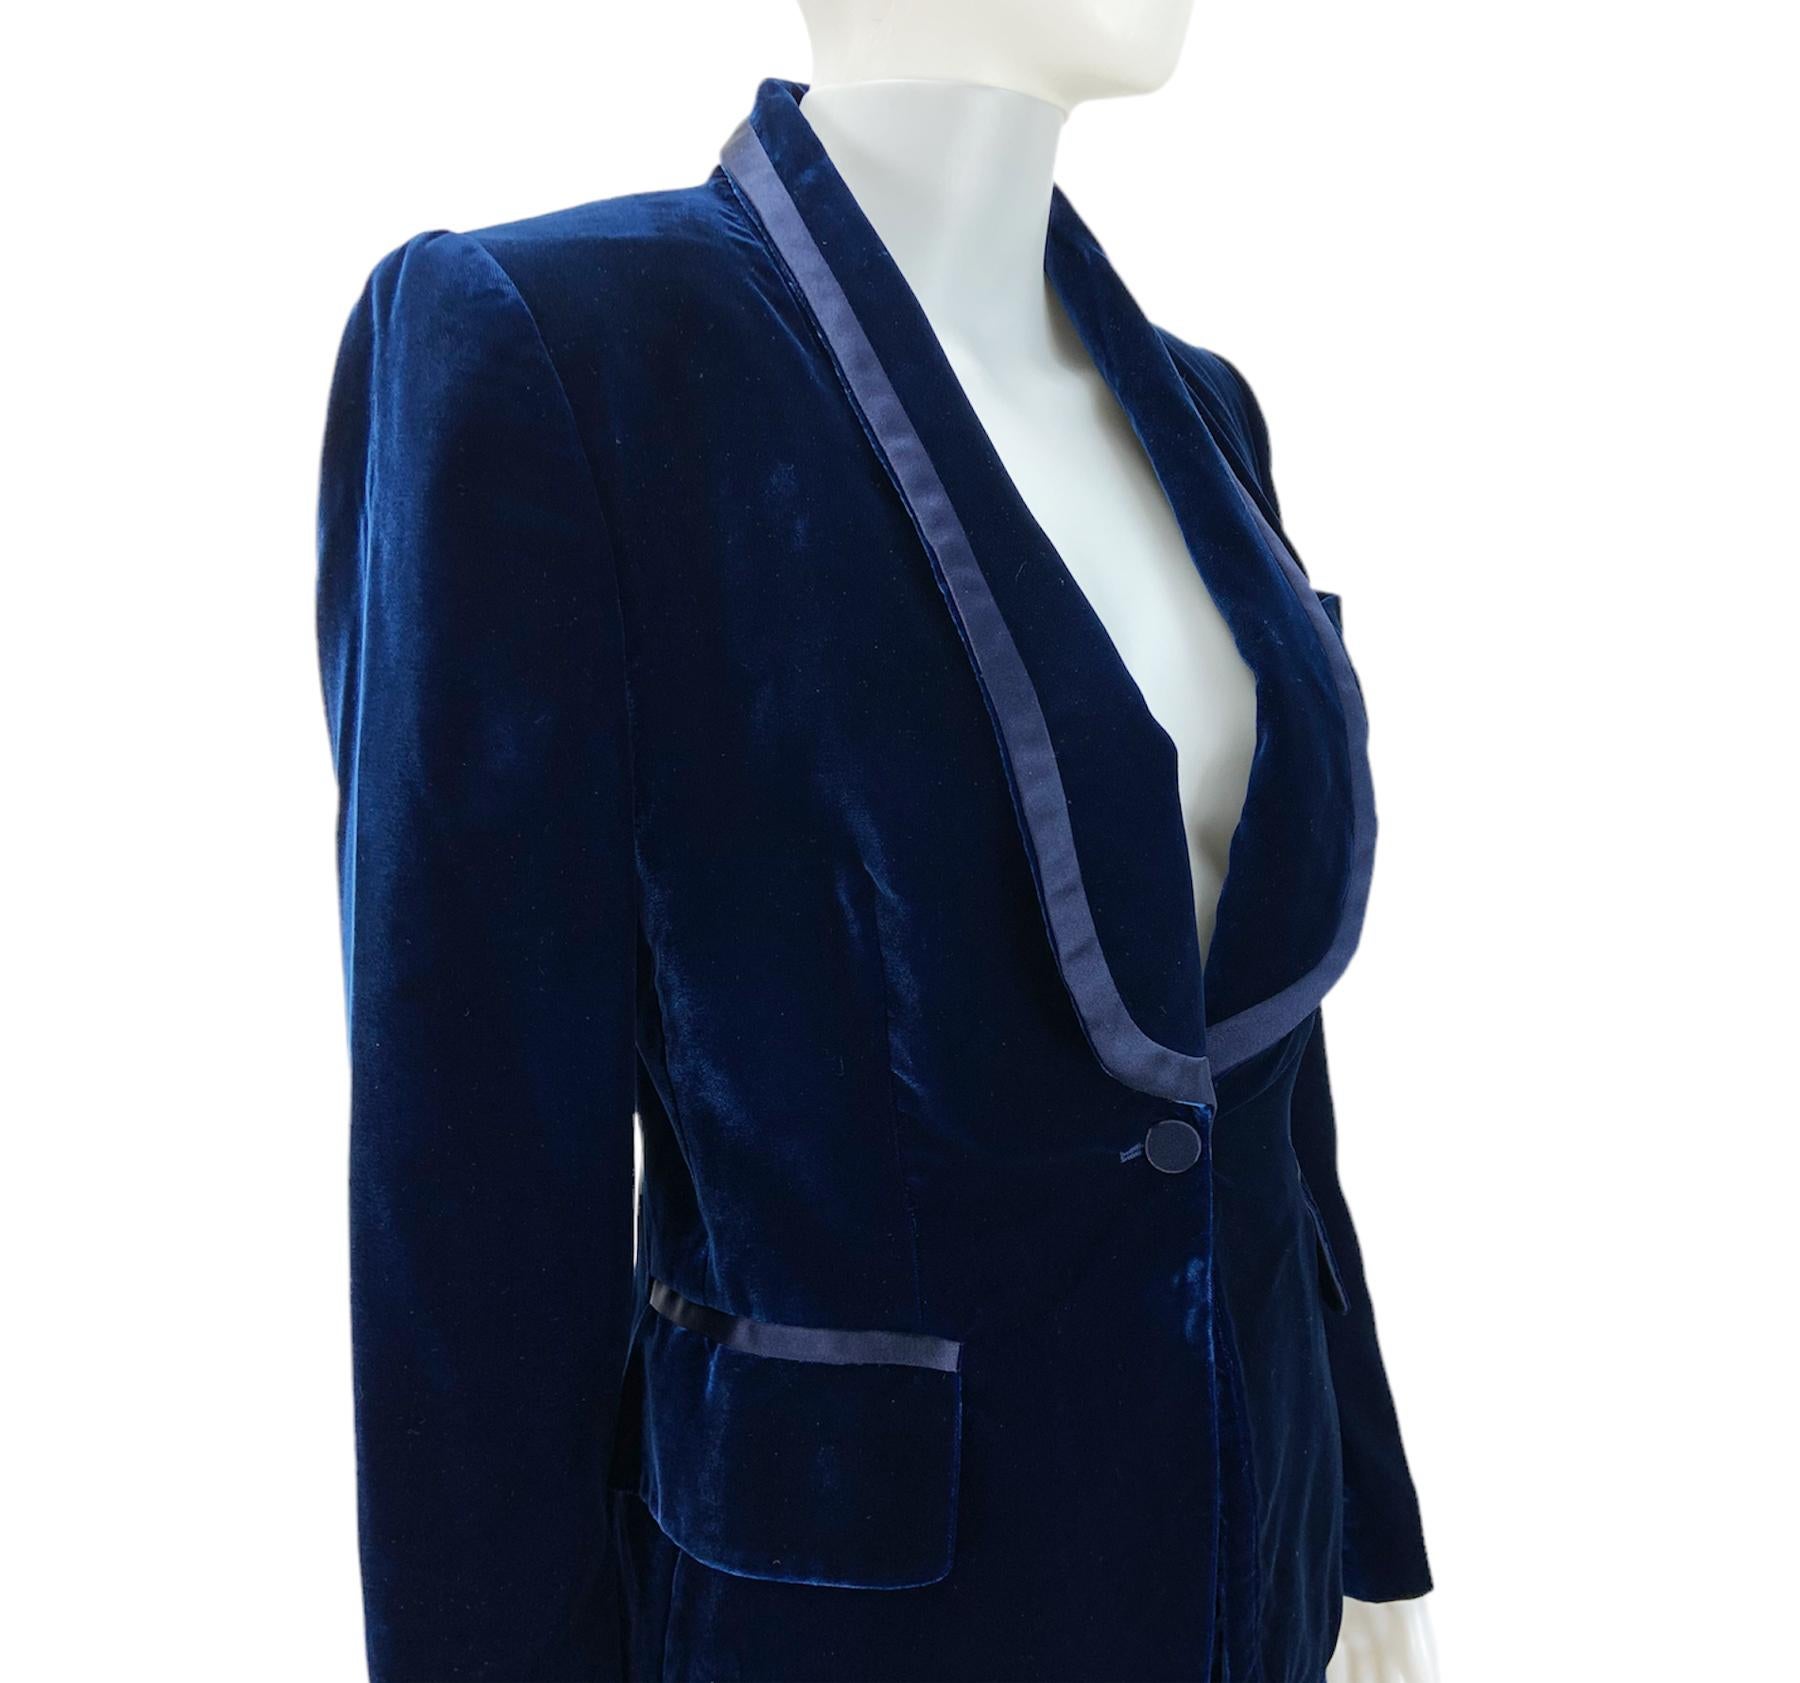 Iconic Tom Ford for Gucci Runway FW 2004 Blue Velvet Tuxedo Pant Suit It 38 2